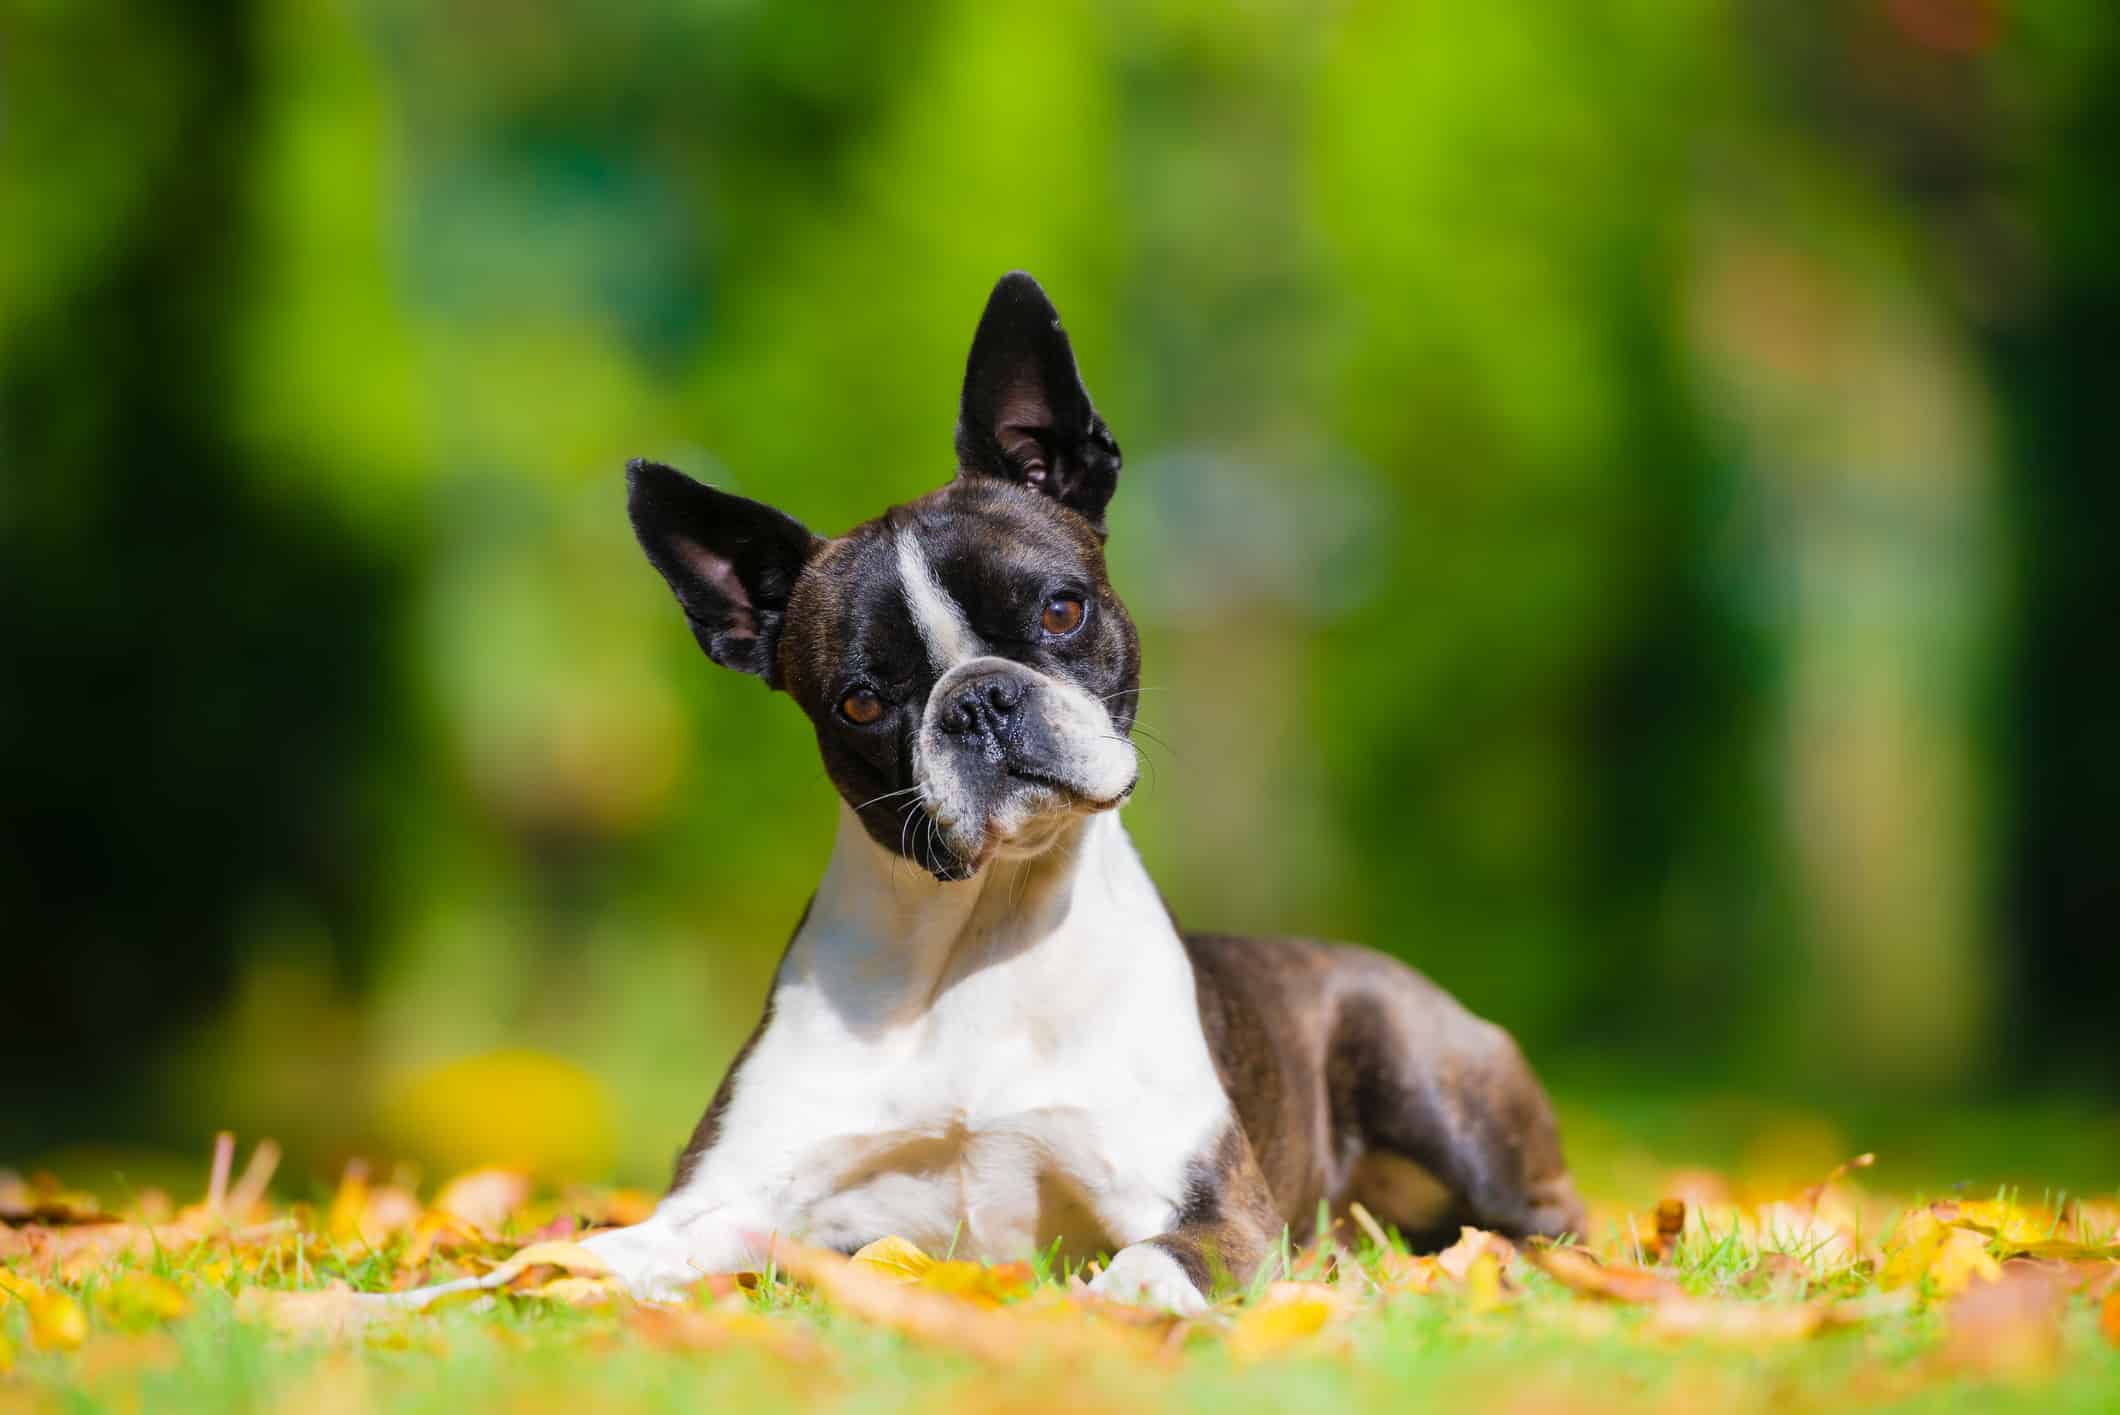 Boston terrier dog on a green lawn in autumn scenery among colorful leaves